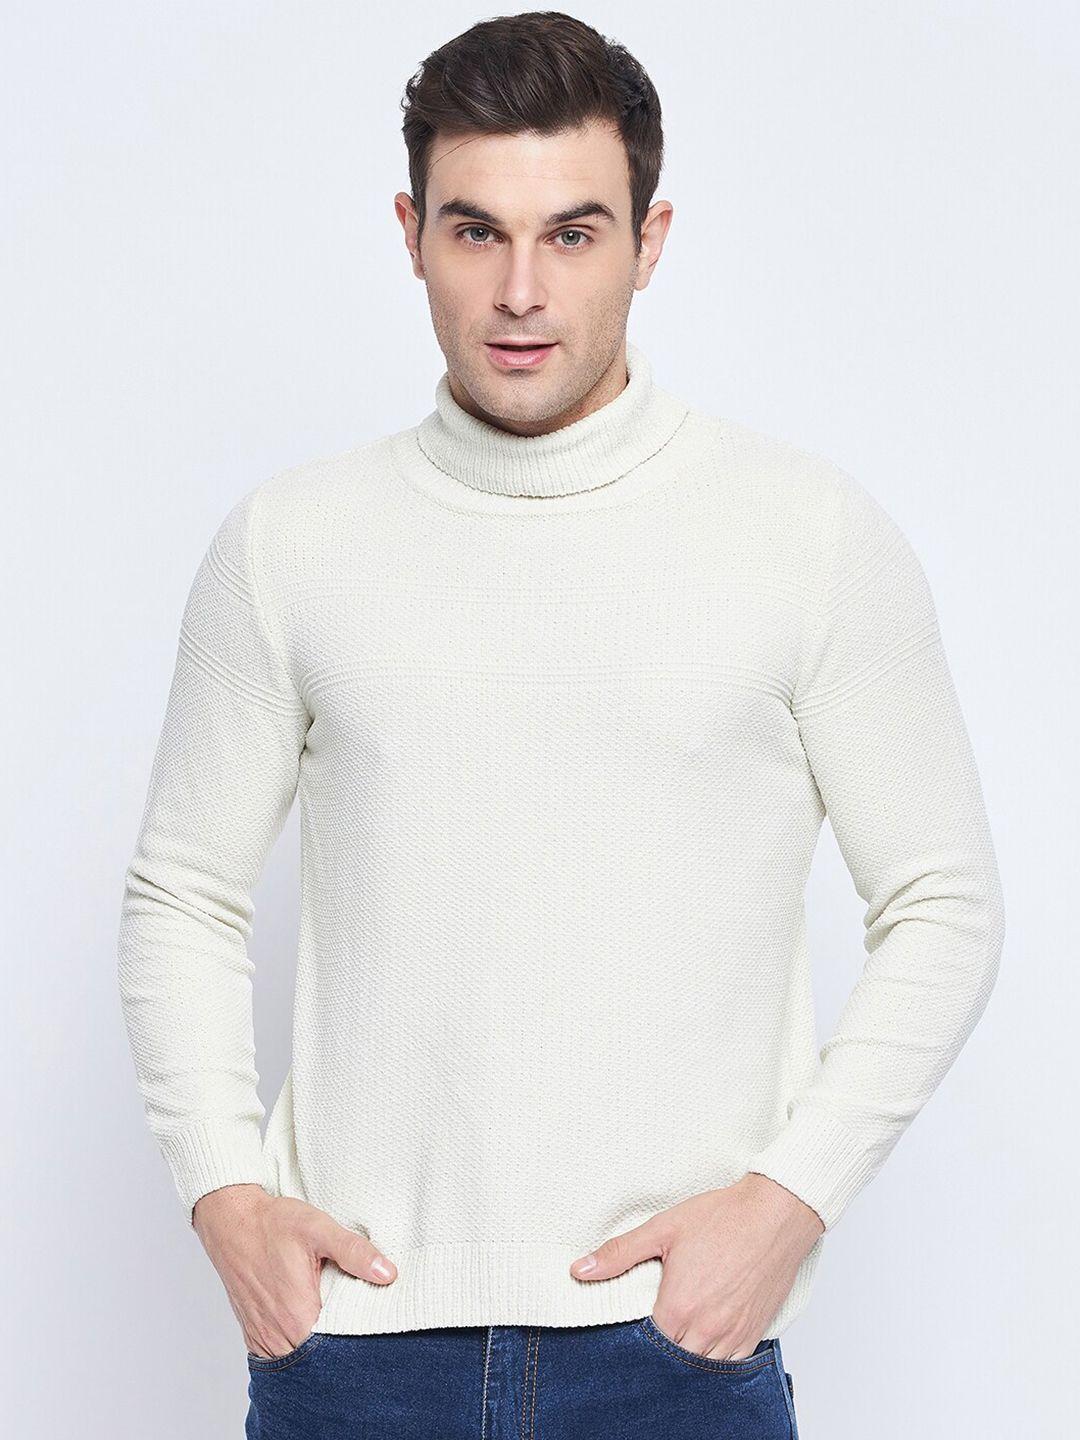 camla open knit self design turtle neck long sleeves acrylic pullover sweater